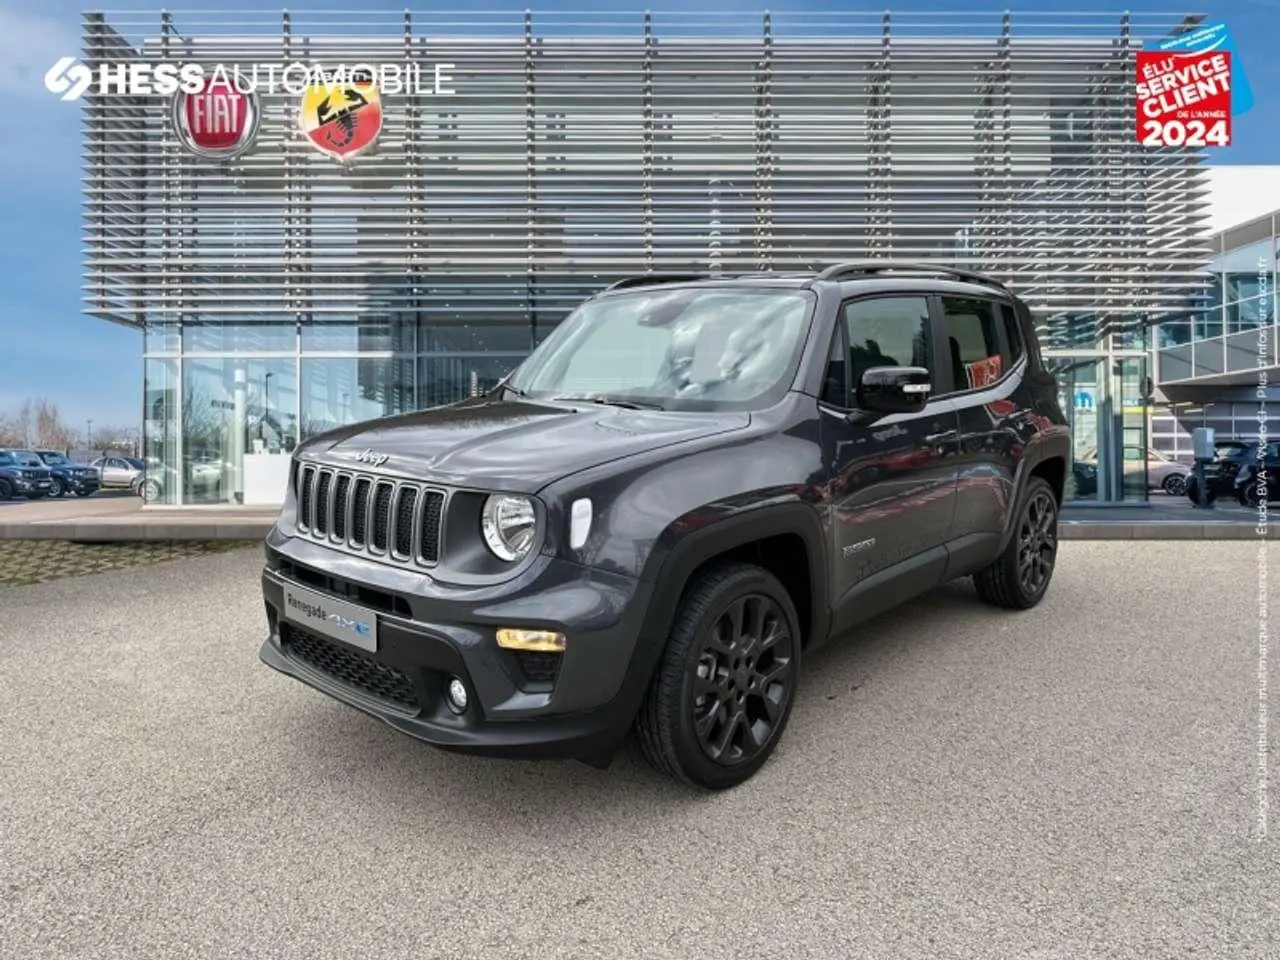 Photo 1 : Jeep Renegade 2023 Others